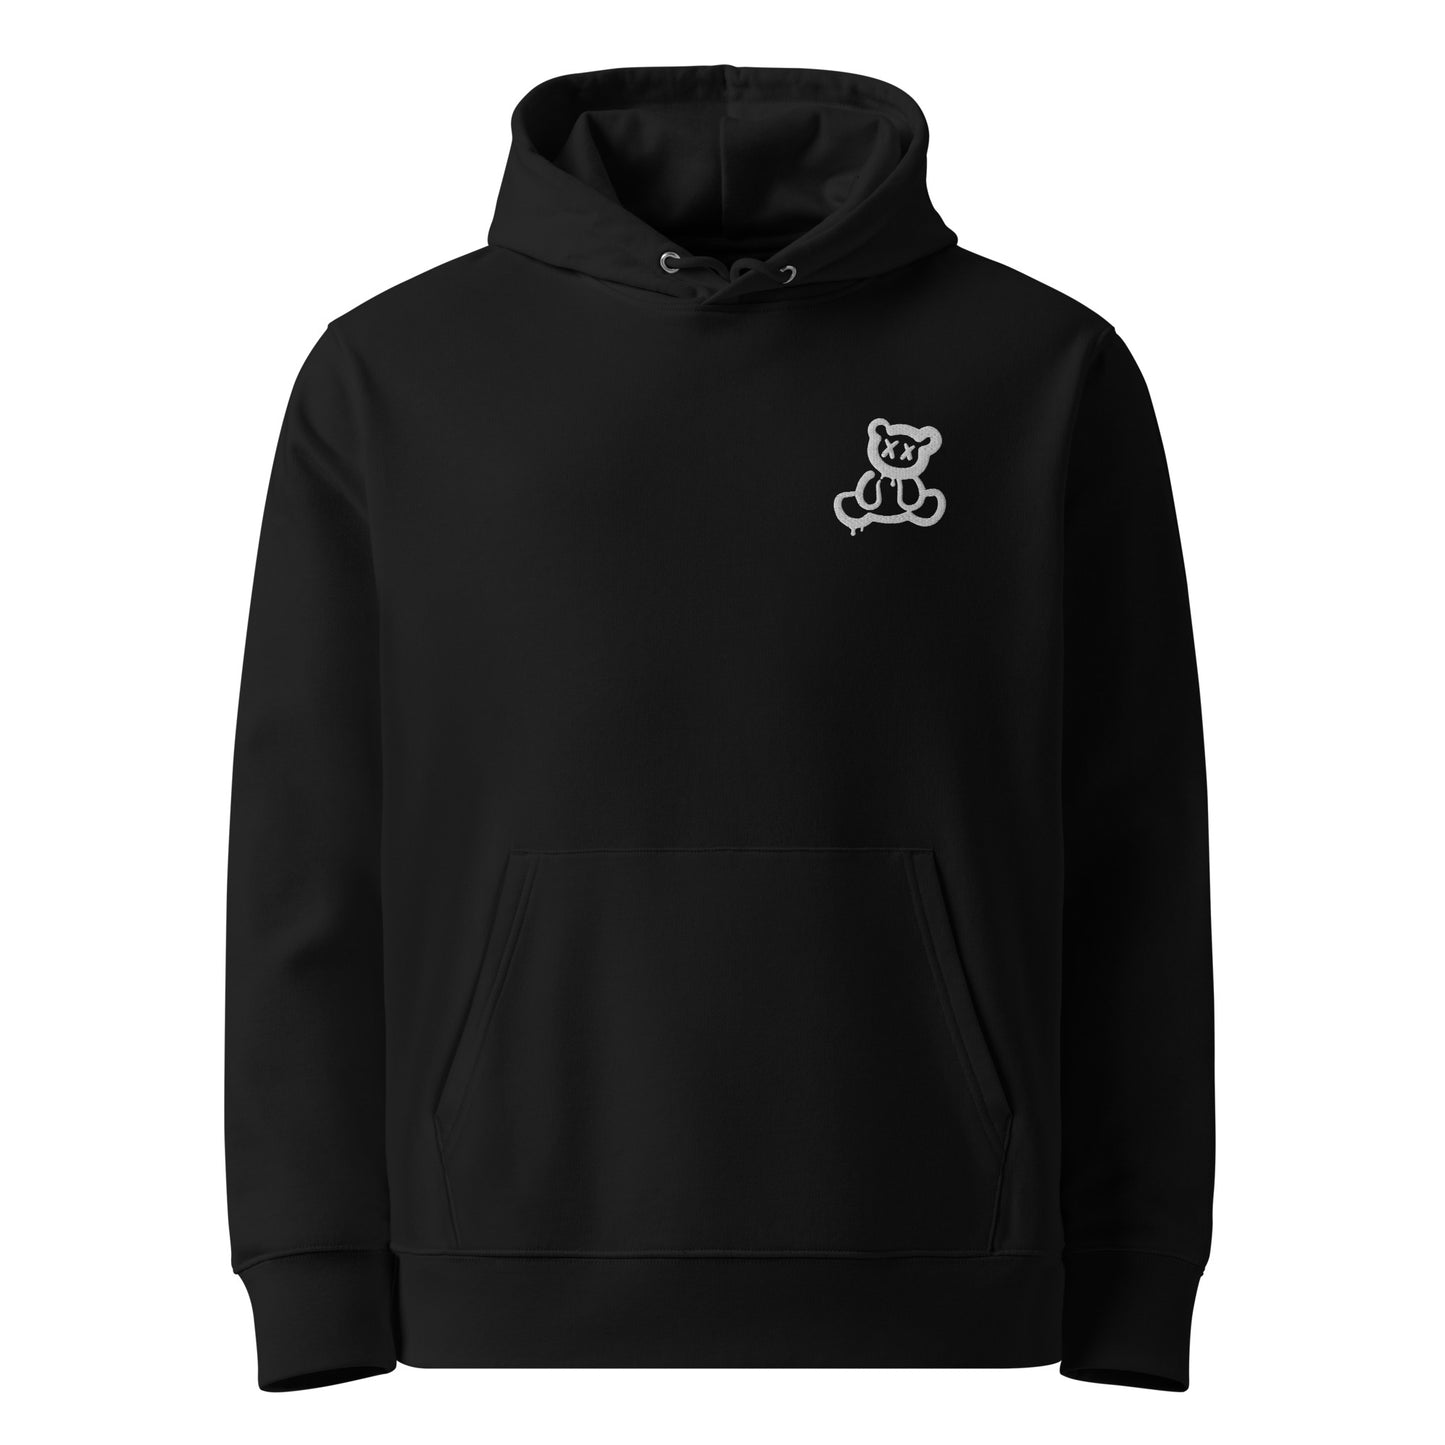 Unisex eco-friendly black hoodie featuring on the upper left chest; a subtle embroidered graffiti bear in white, adding a touch of lgbtq to your outfit. sizes: small, medium, large, extra large, double extra large.